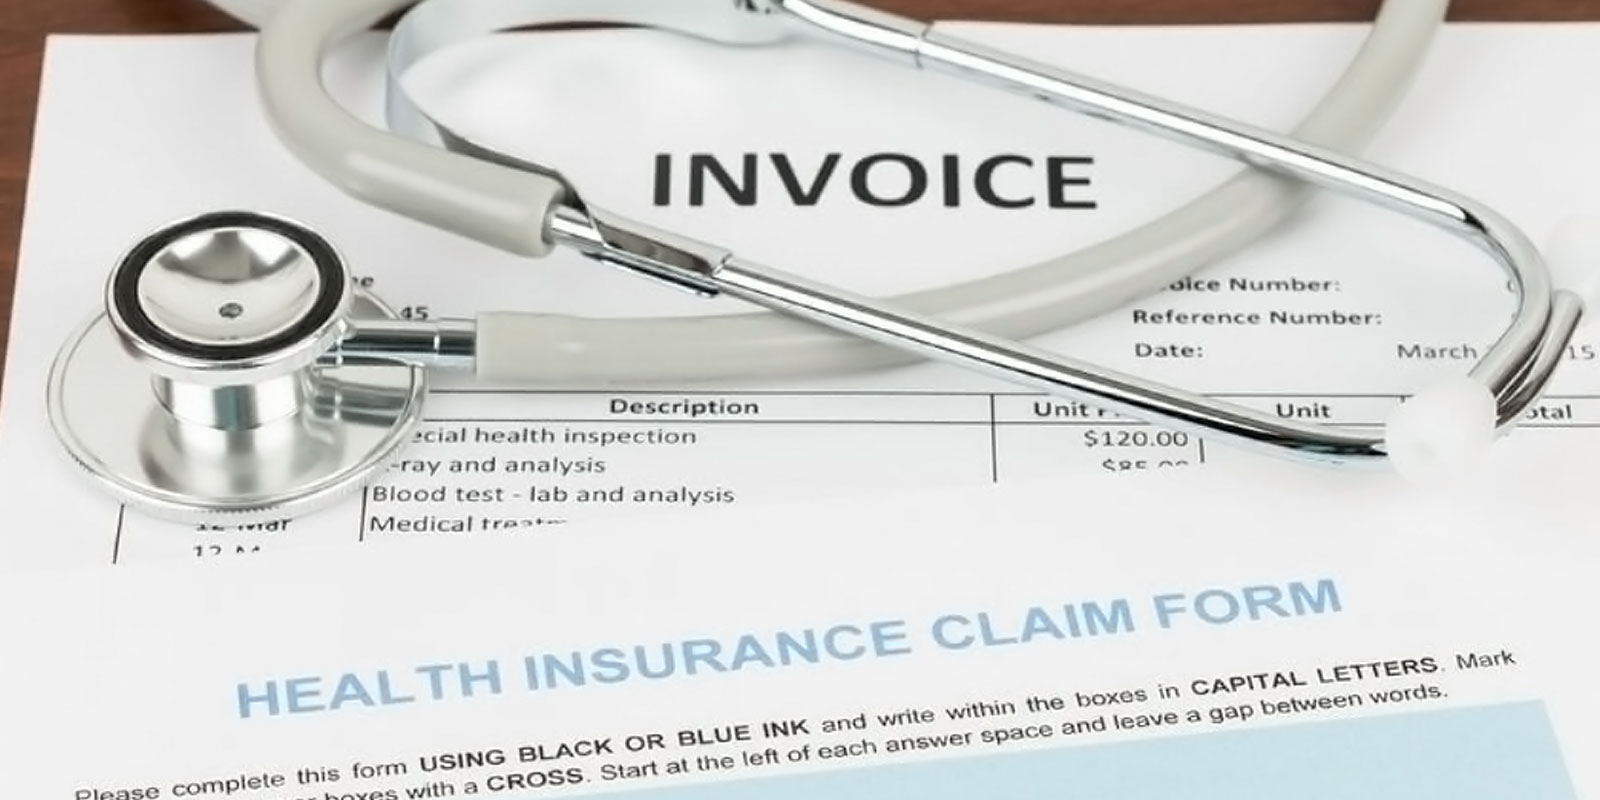 Can Filing for Bankruptcy Help with Medical Bills?